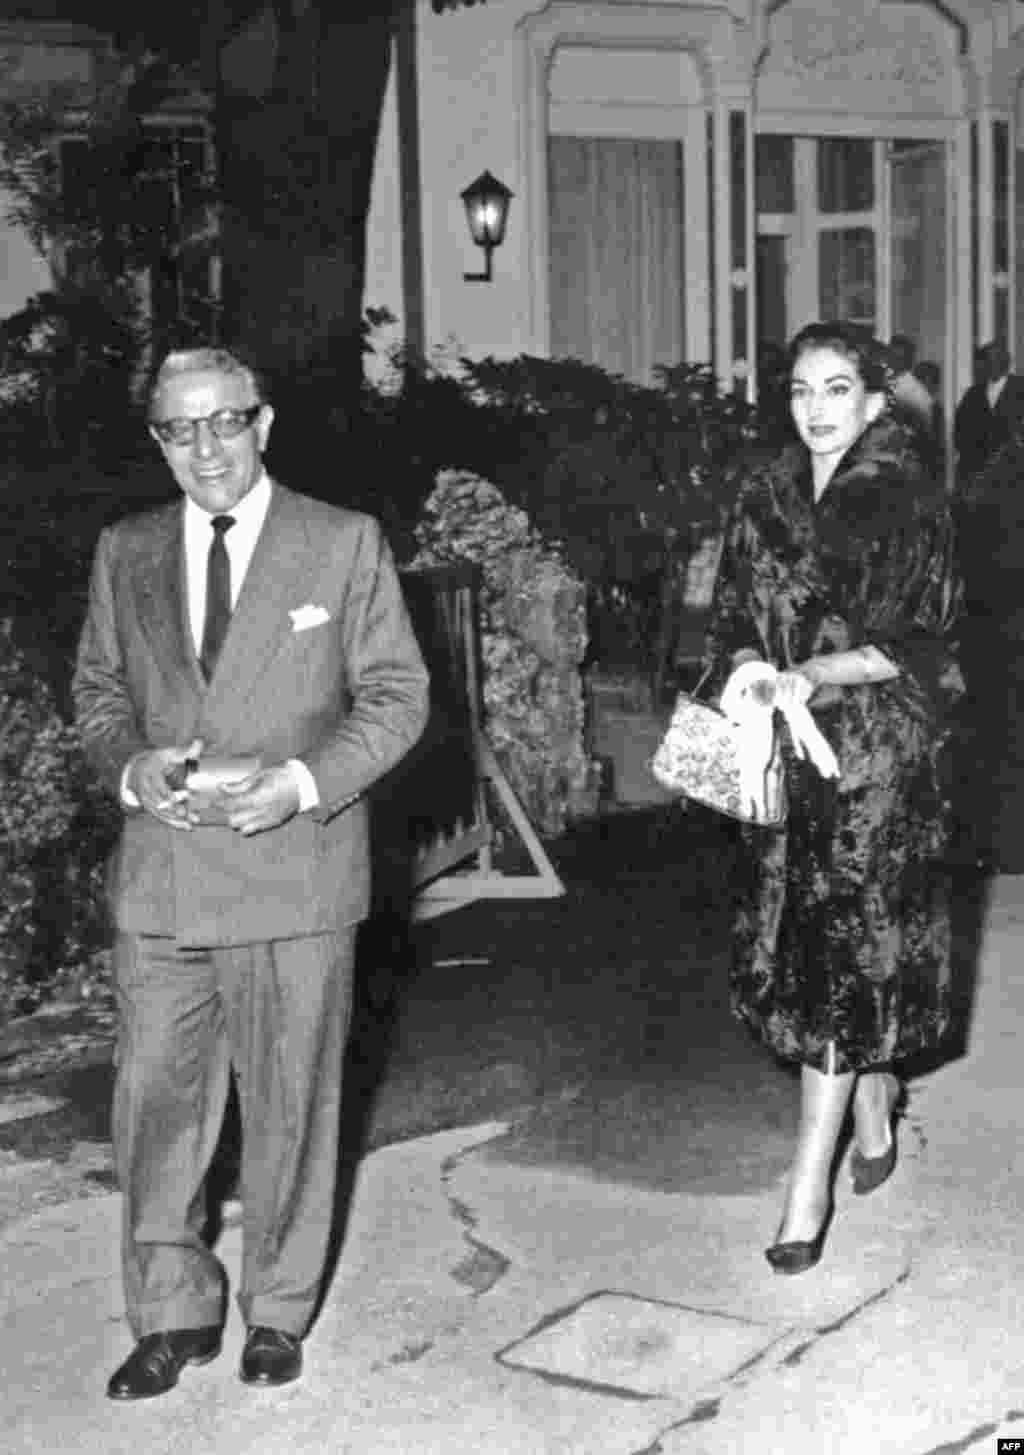 Callas leaving a nightclub in Milan with her companion, Greek shipping magnate Aristotle Onassis, on September 6, 1959